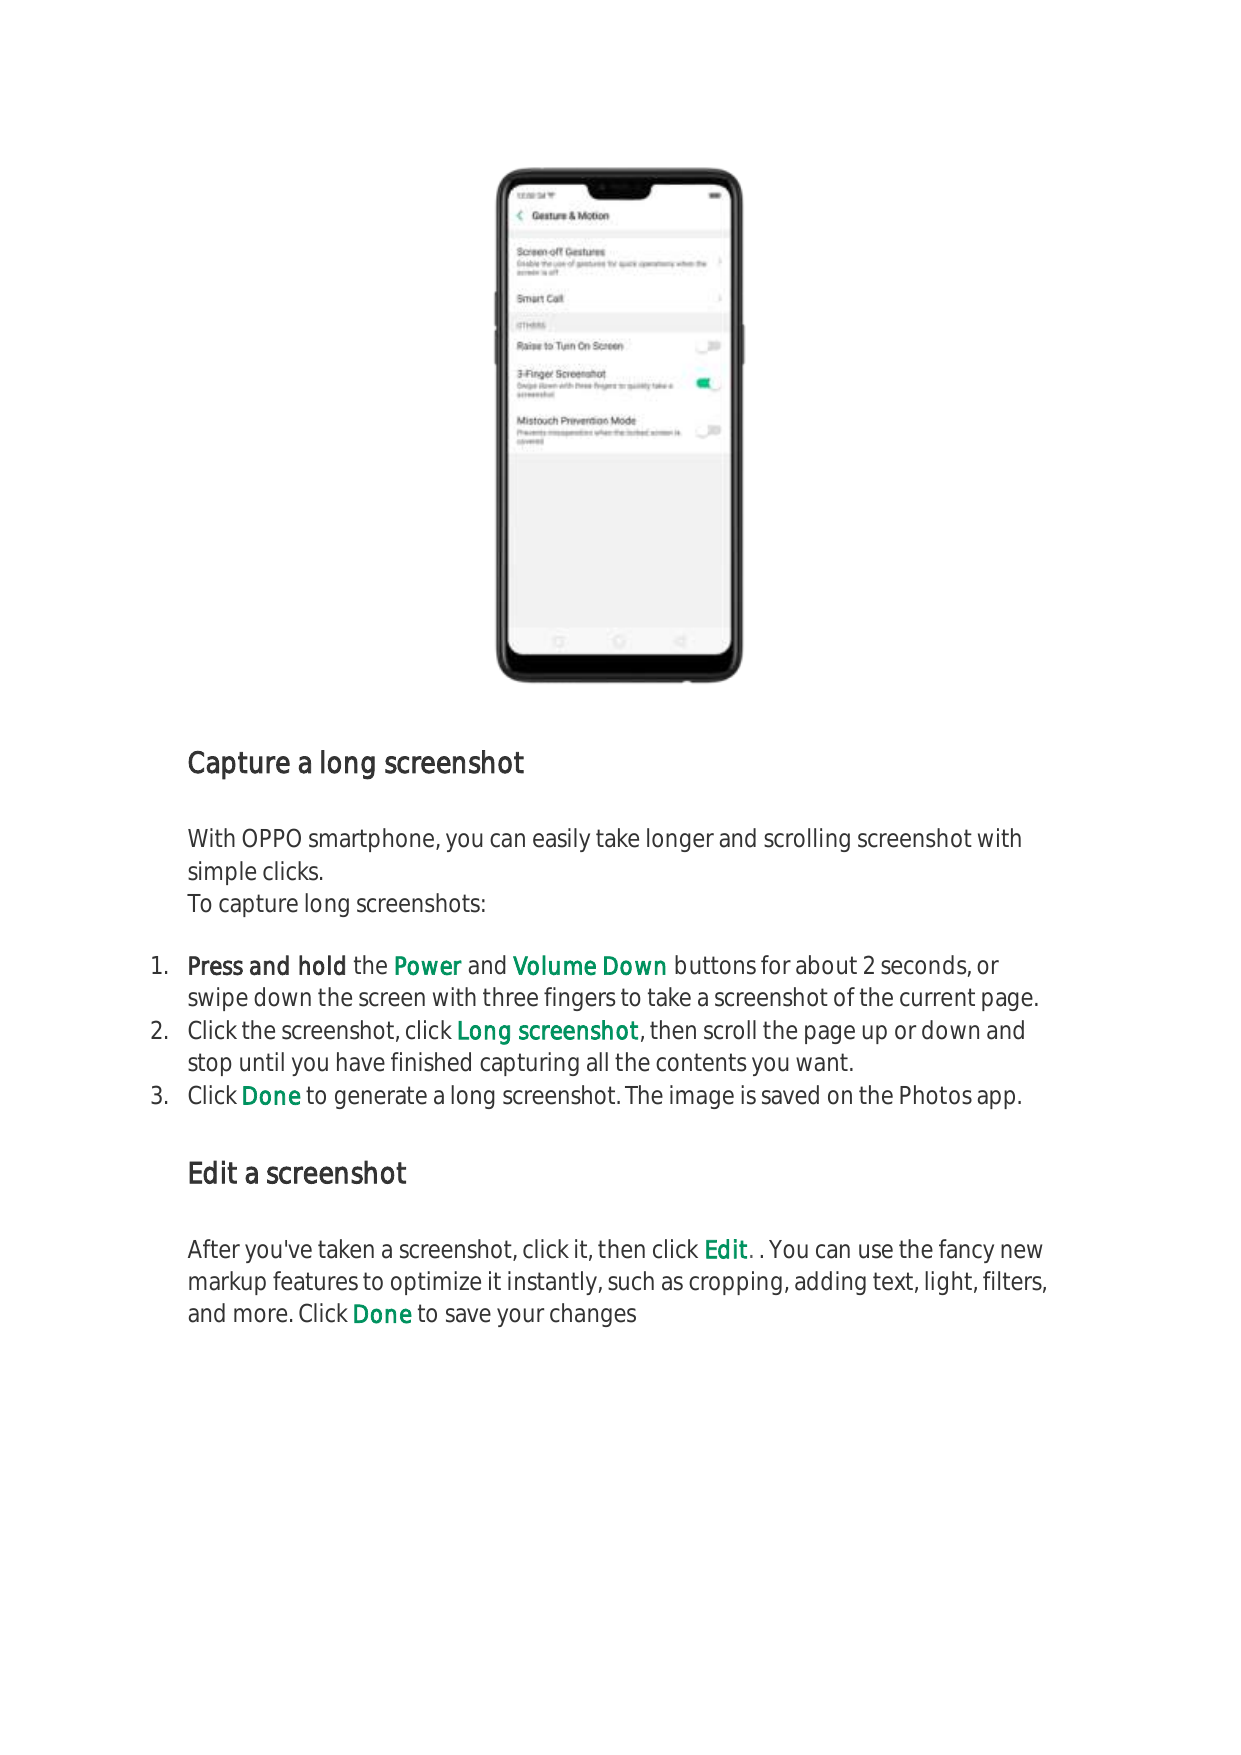 Capture a long screenshotWith OPPO smartphone, you can easily take longer and scrolling screenshot withsimple clicks.To capture 